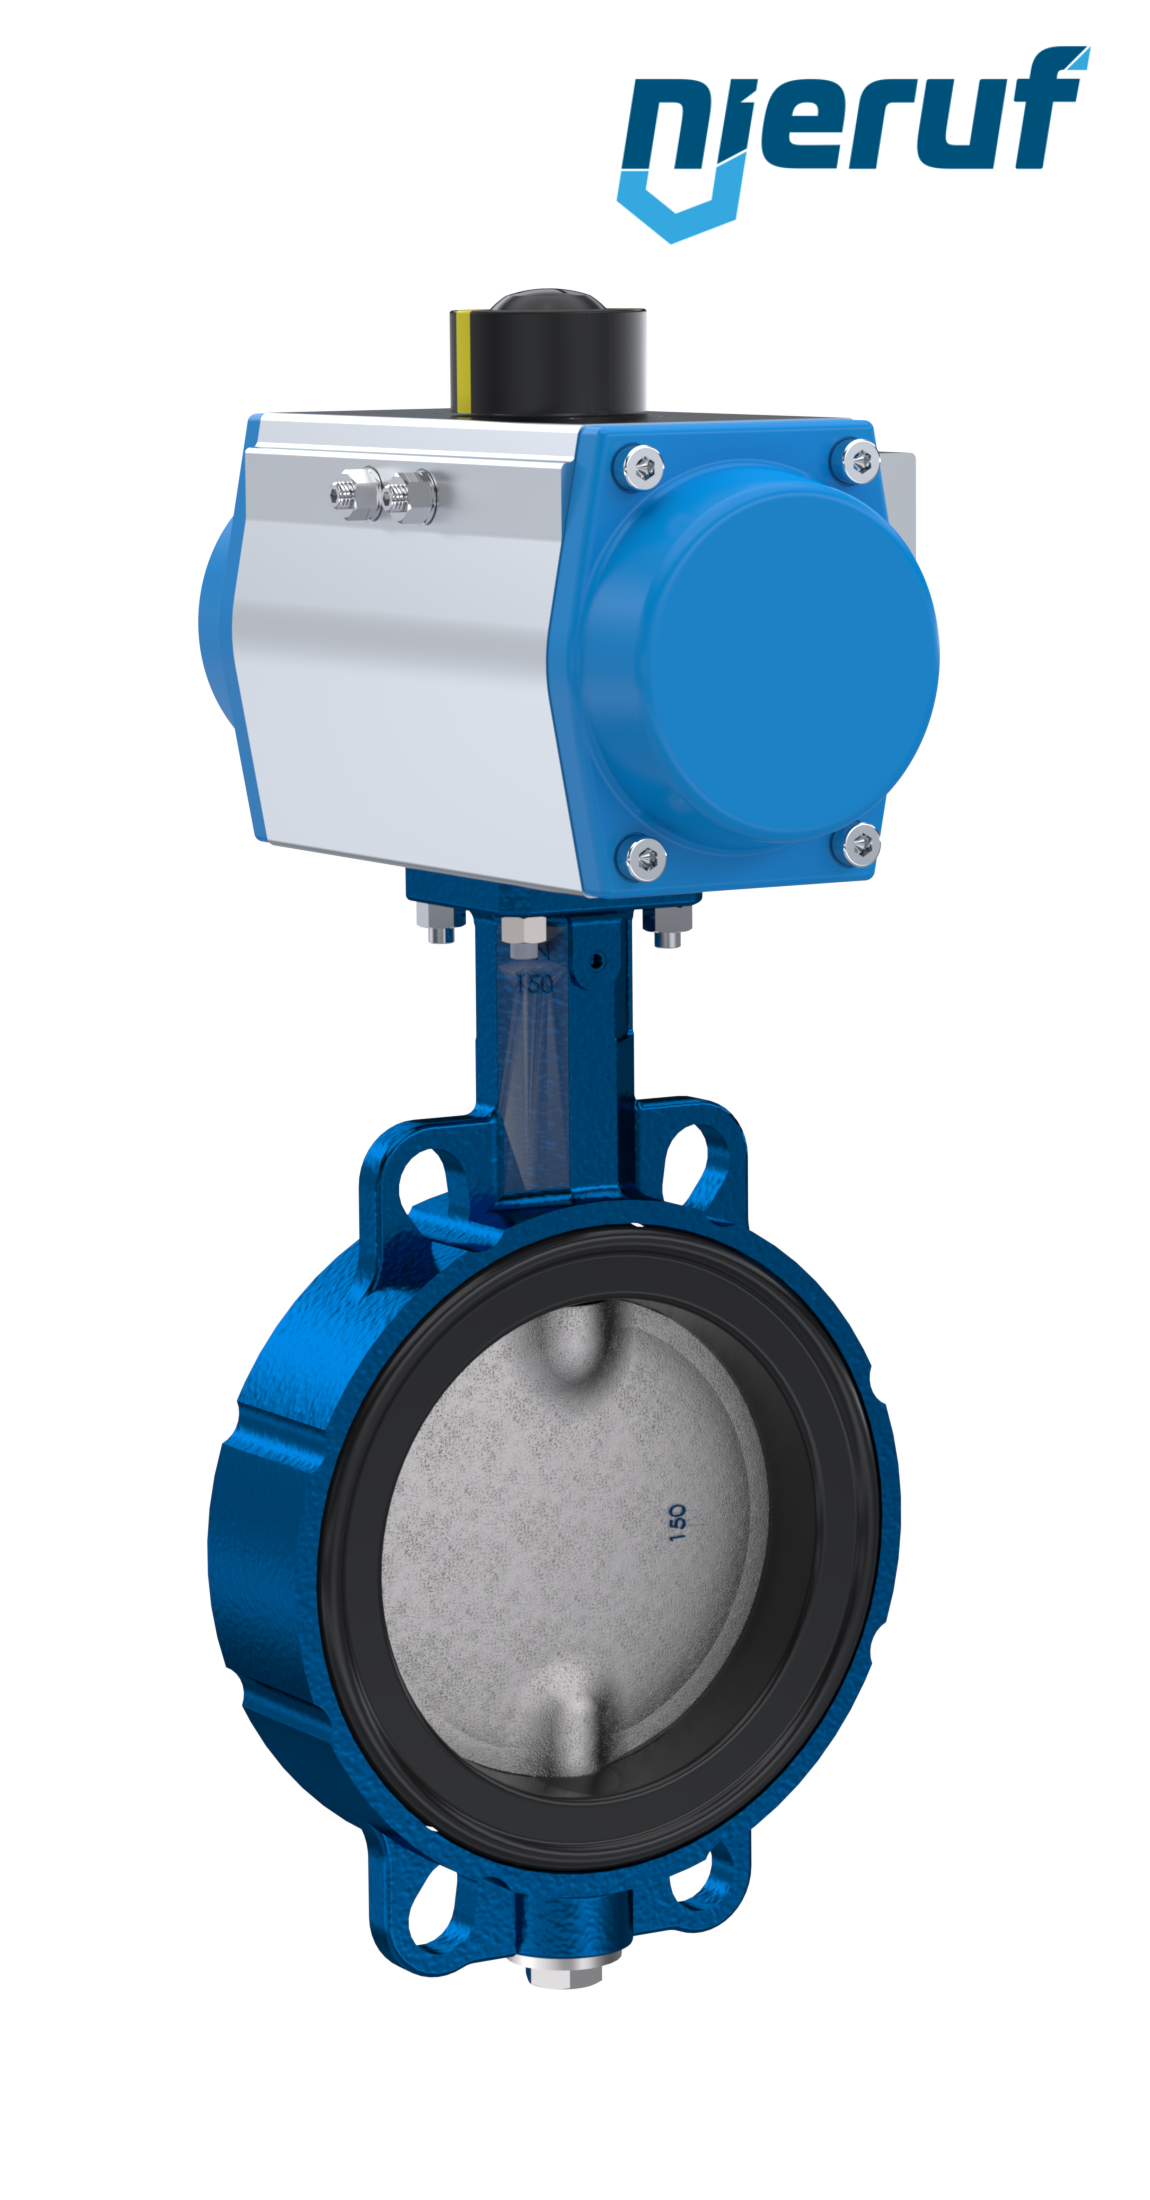 Butterfly valve DN 125 AK01 EPDM DVGW drinking water, WRAS, ACS, W270 pneumatic actuator double acting